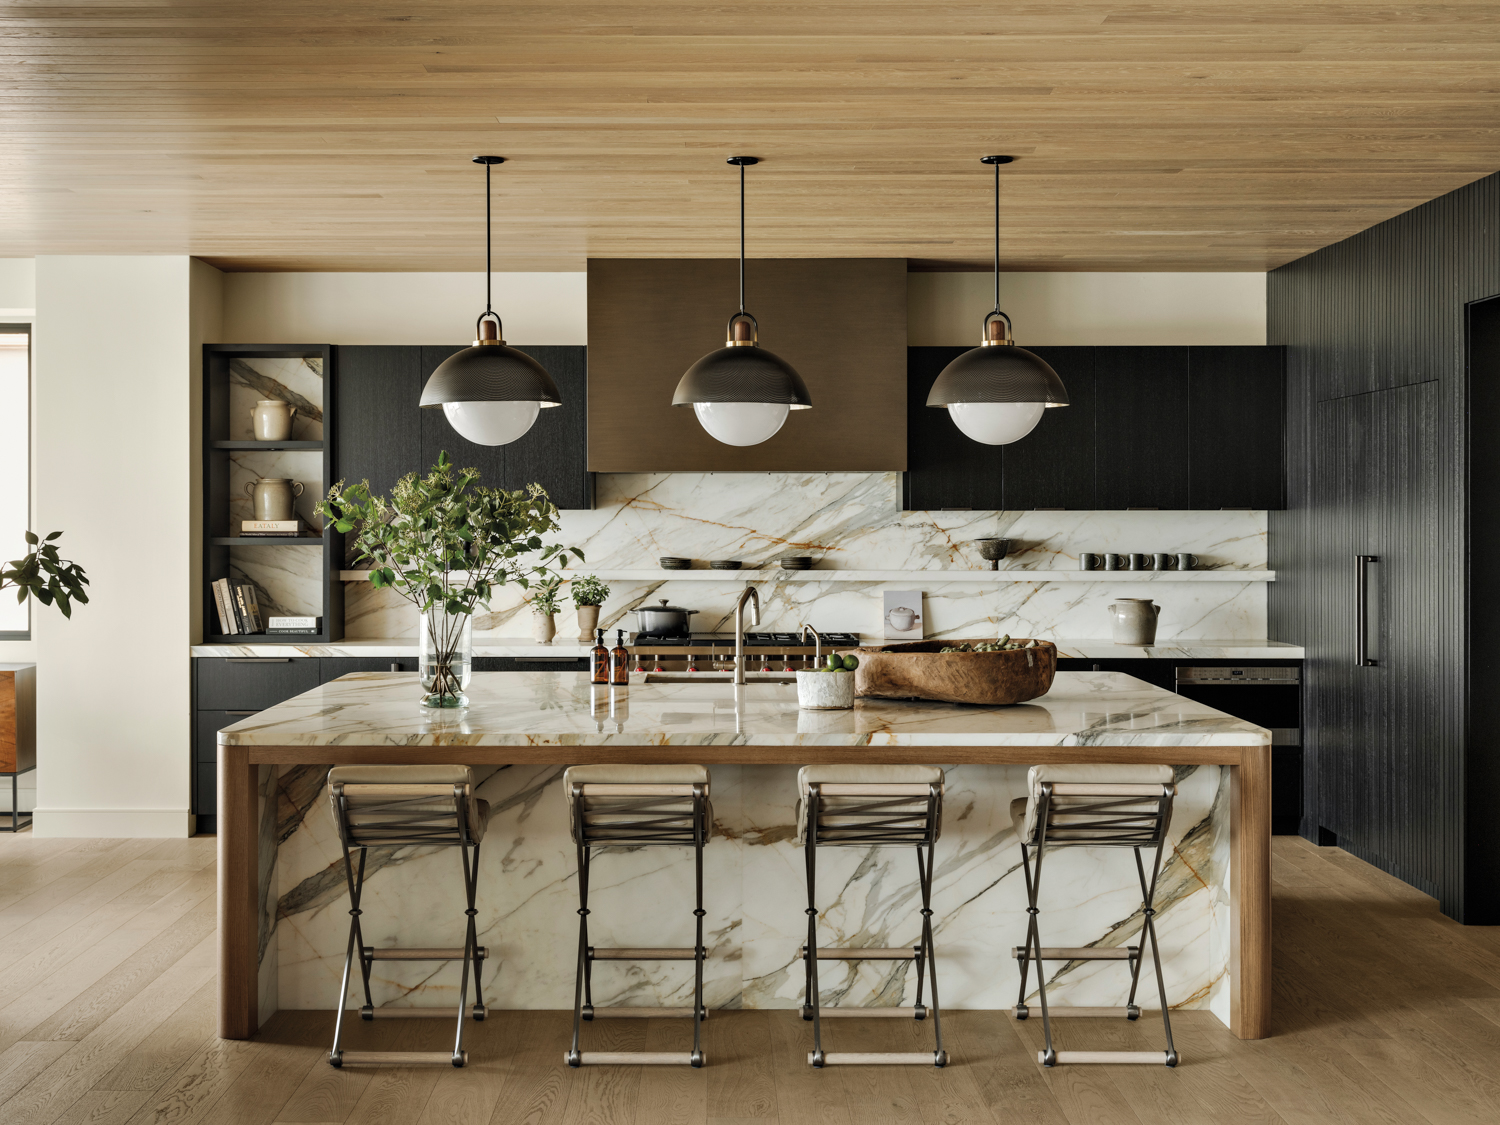 kitchen with wood ceilings, black...